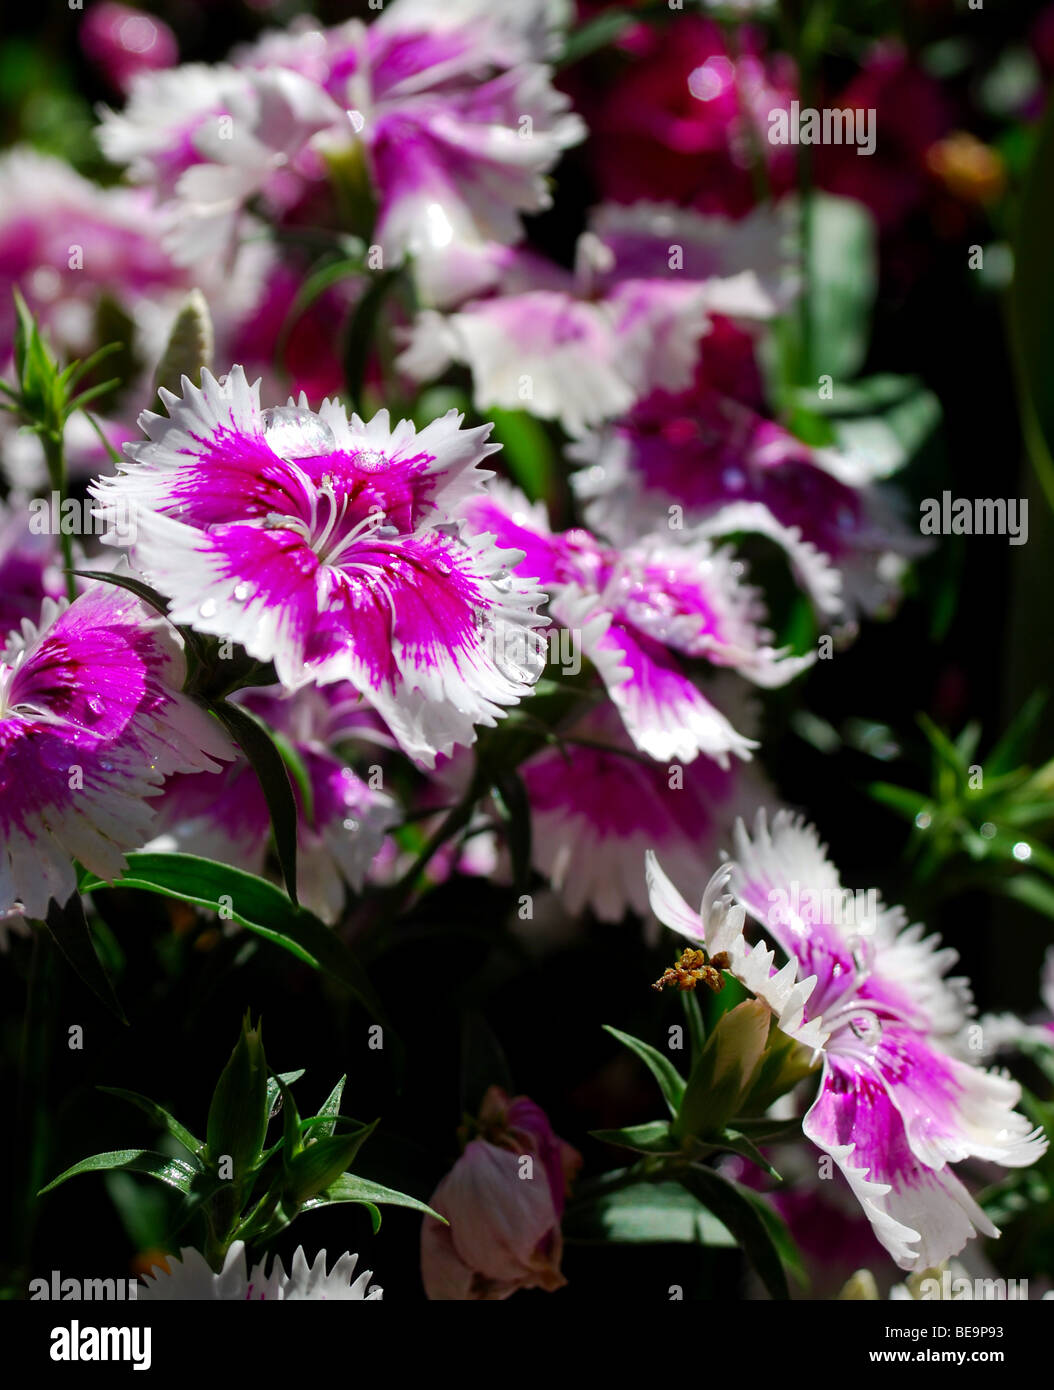 Purple and white flowers Stock Photo